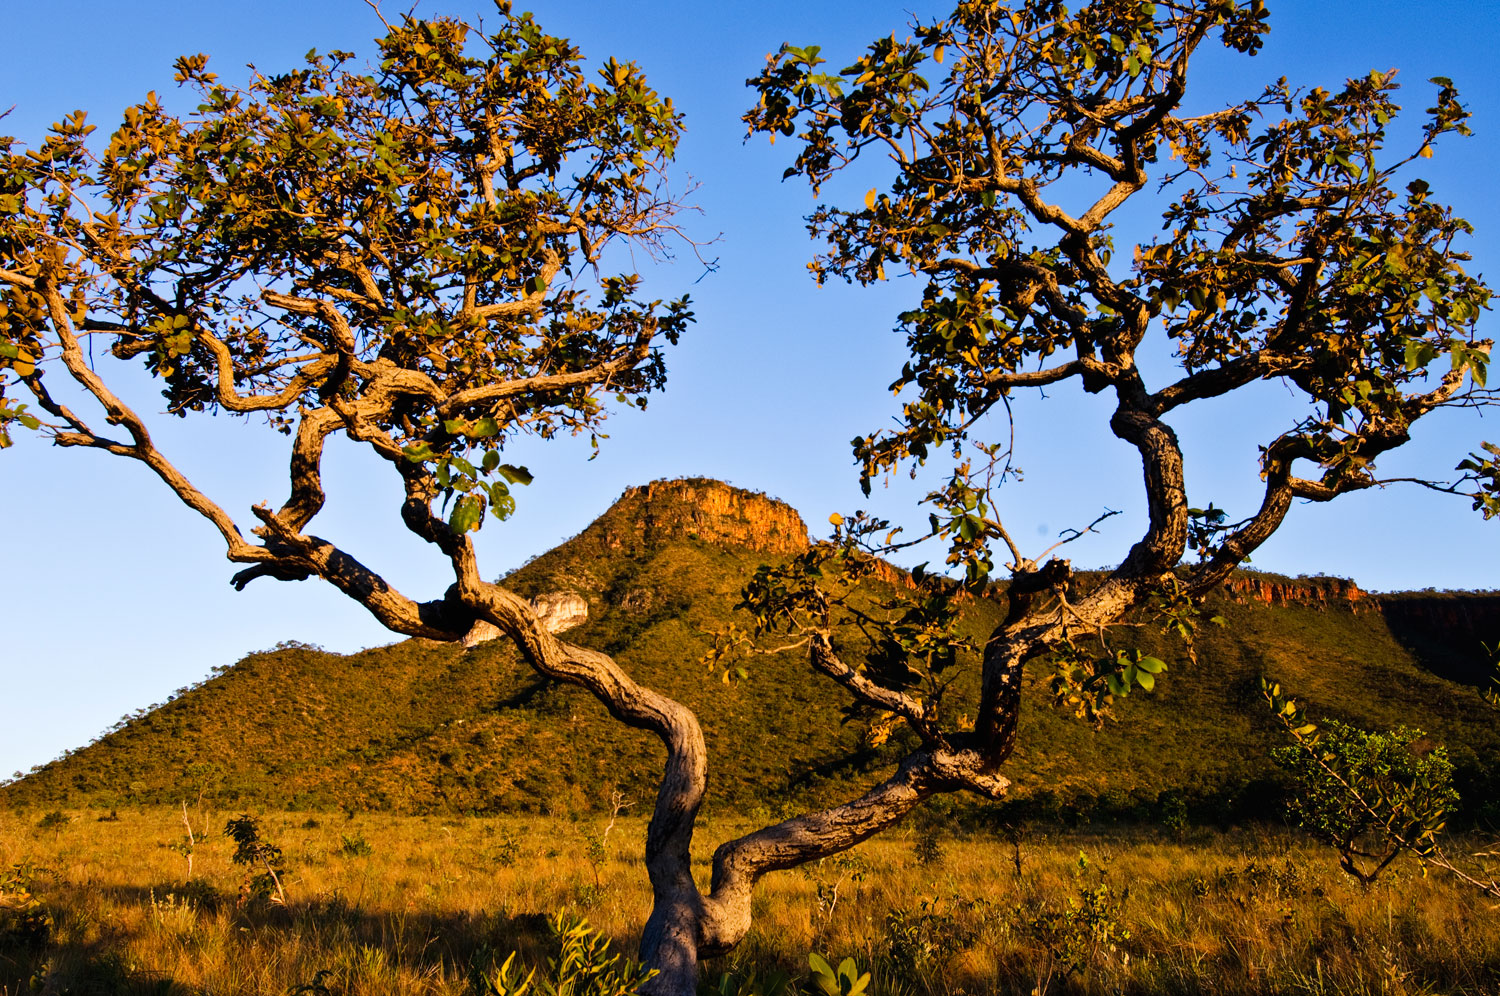 The largest national park of its region, Jalapao, has become an increasingly popular destination for adventure tourists and was even featured on a season of Survivor.